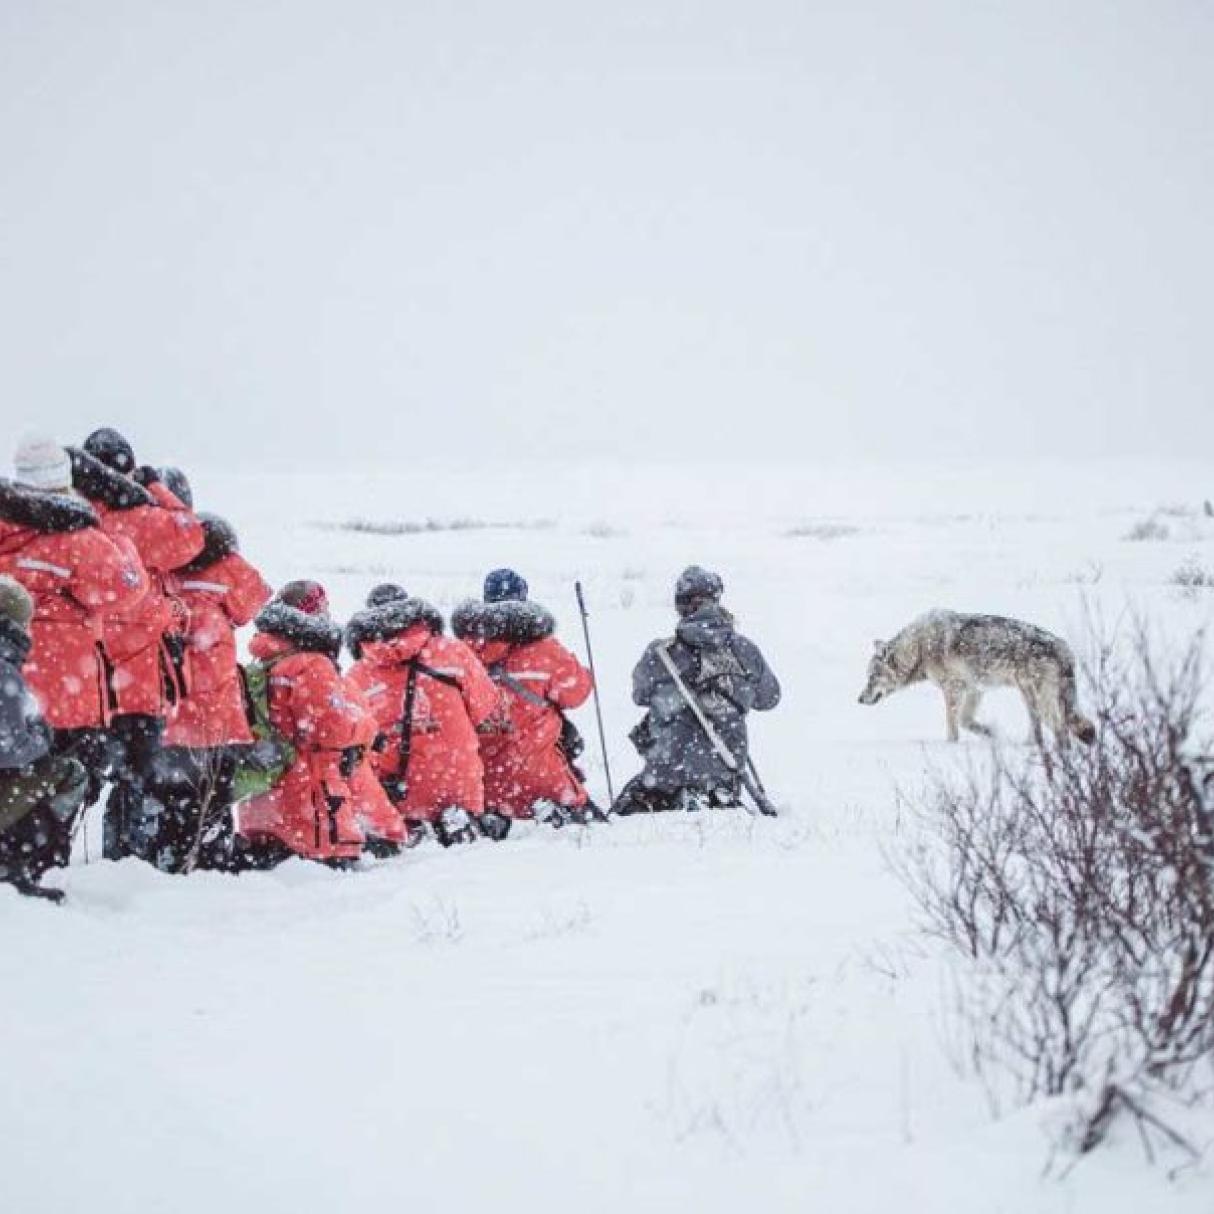 A group of people in red winter coats stand and kneel in a snowy tundra overlooking a wolf walkign past.